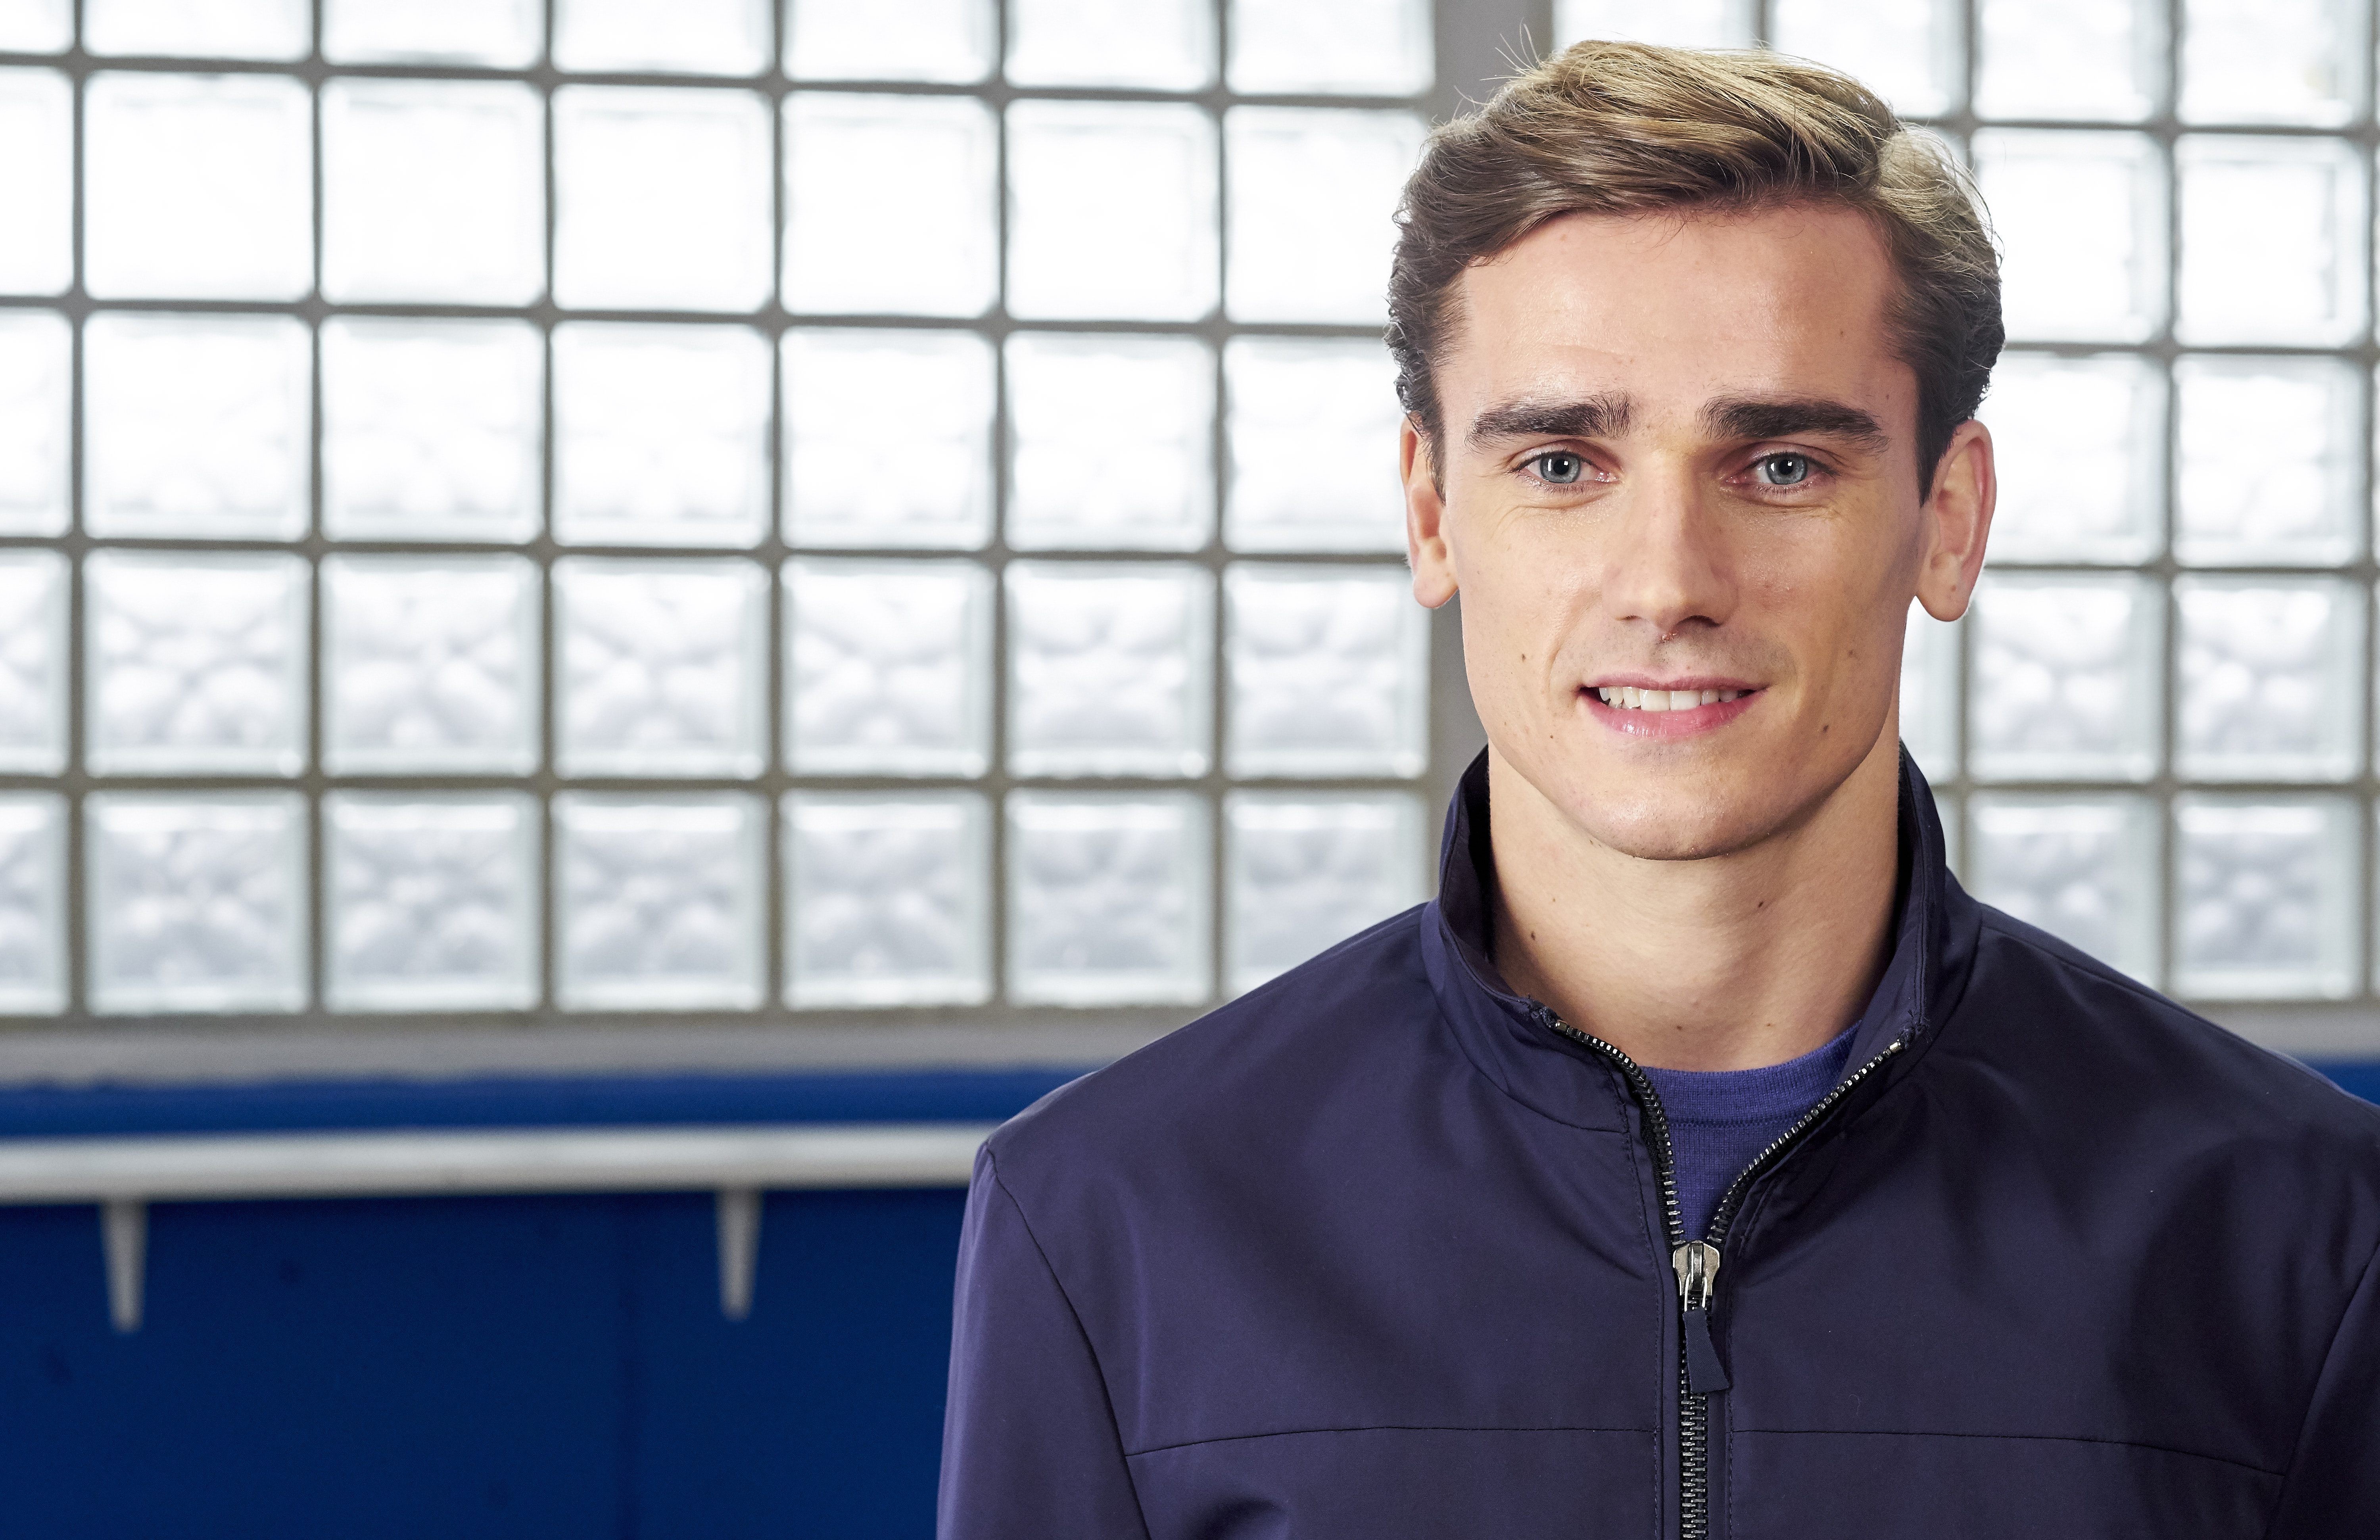 sports, antoine griezmann, french, soccer